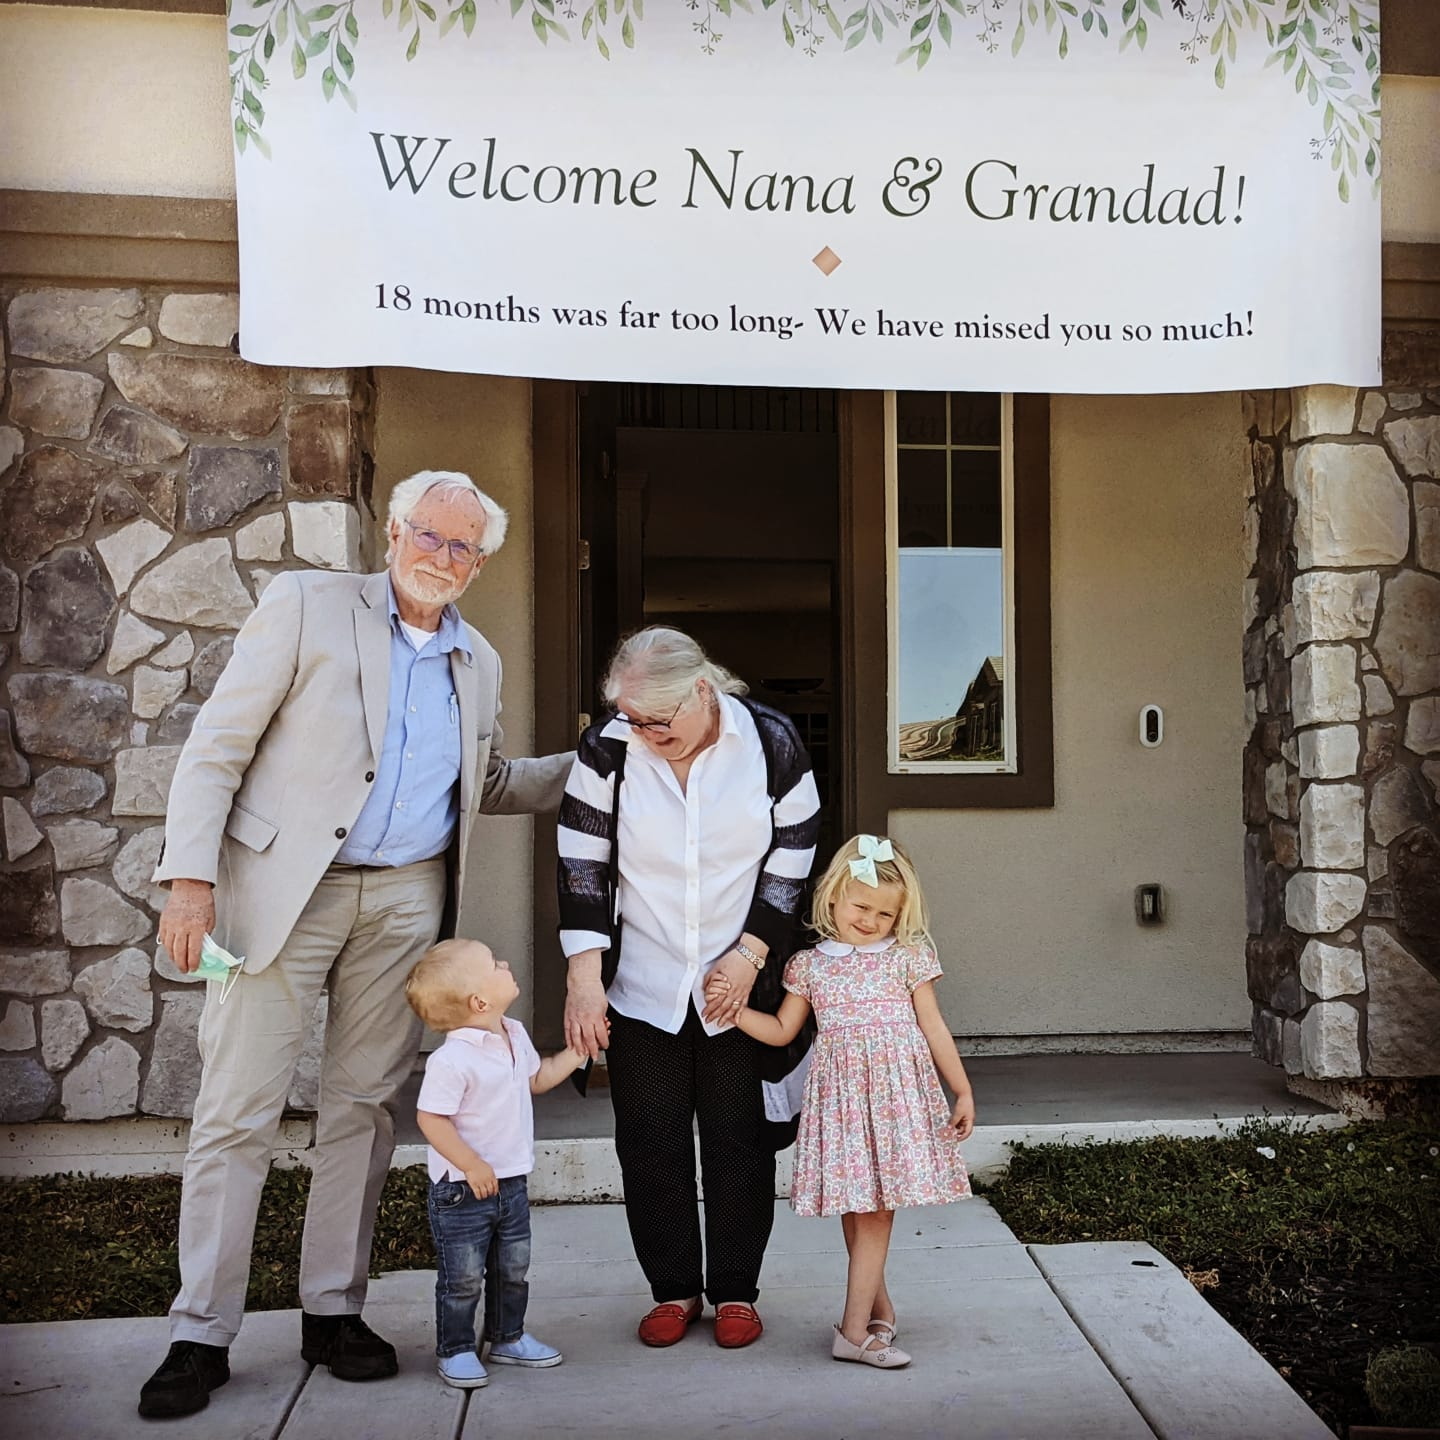 Tony and Heather, with grandchildren, under a large welcome sign